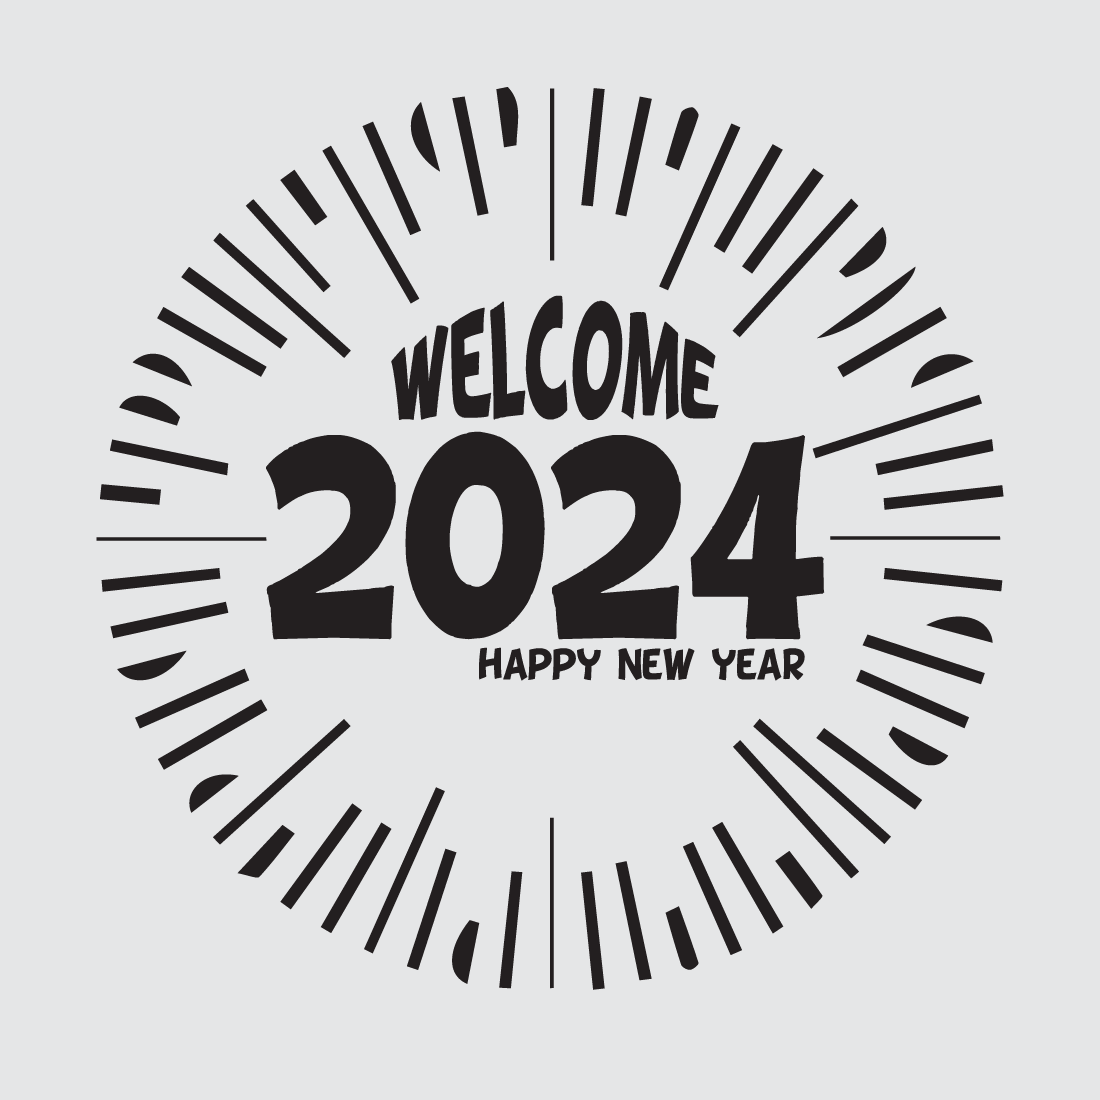 Happy new year 2024 Typography t-shirt design for everyone preview image.